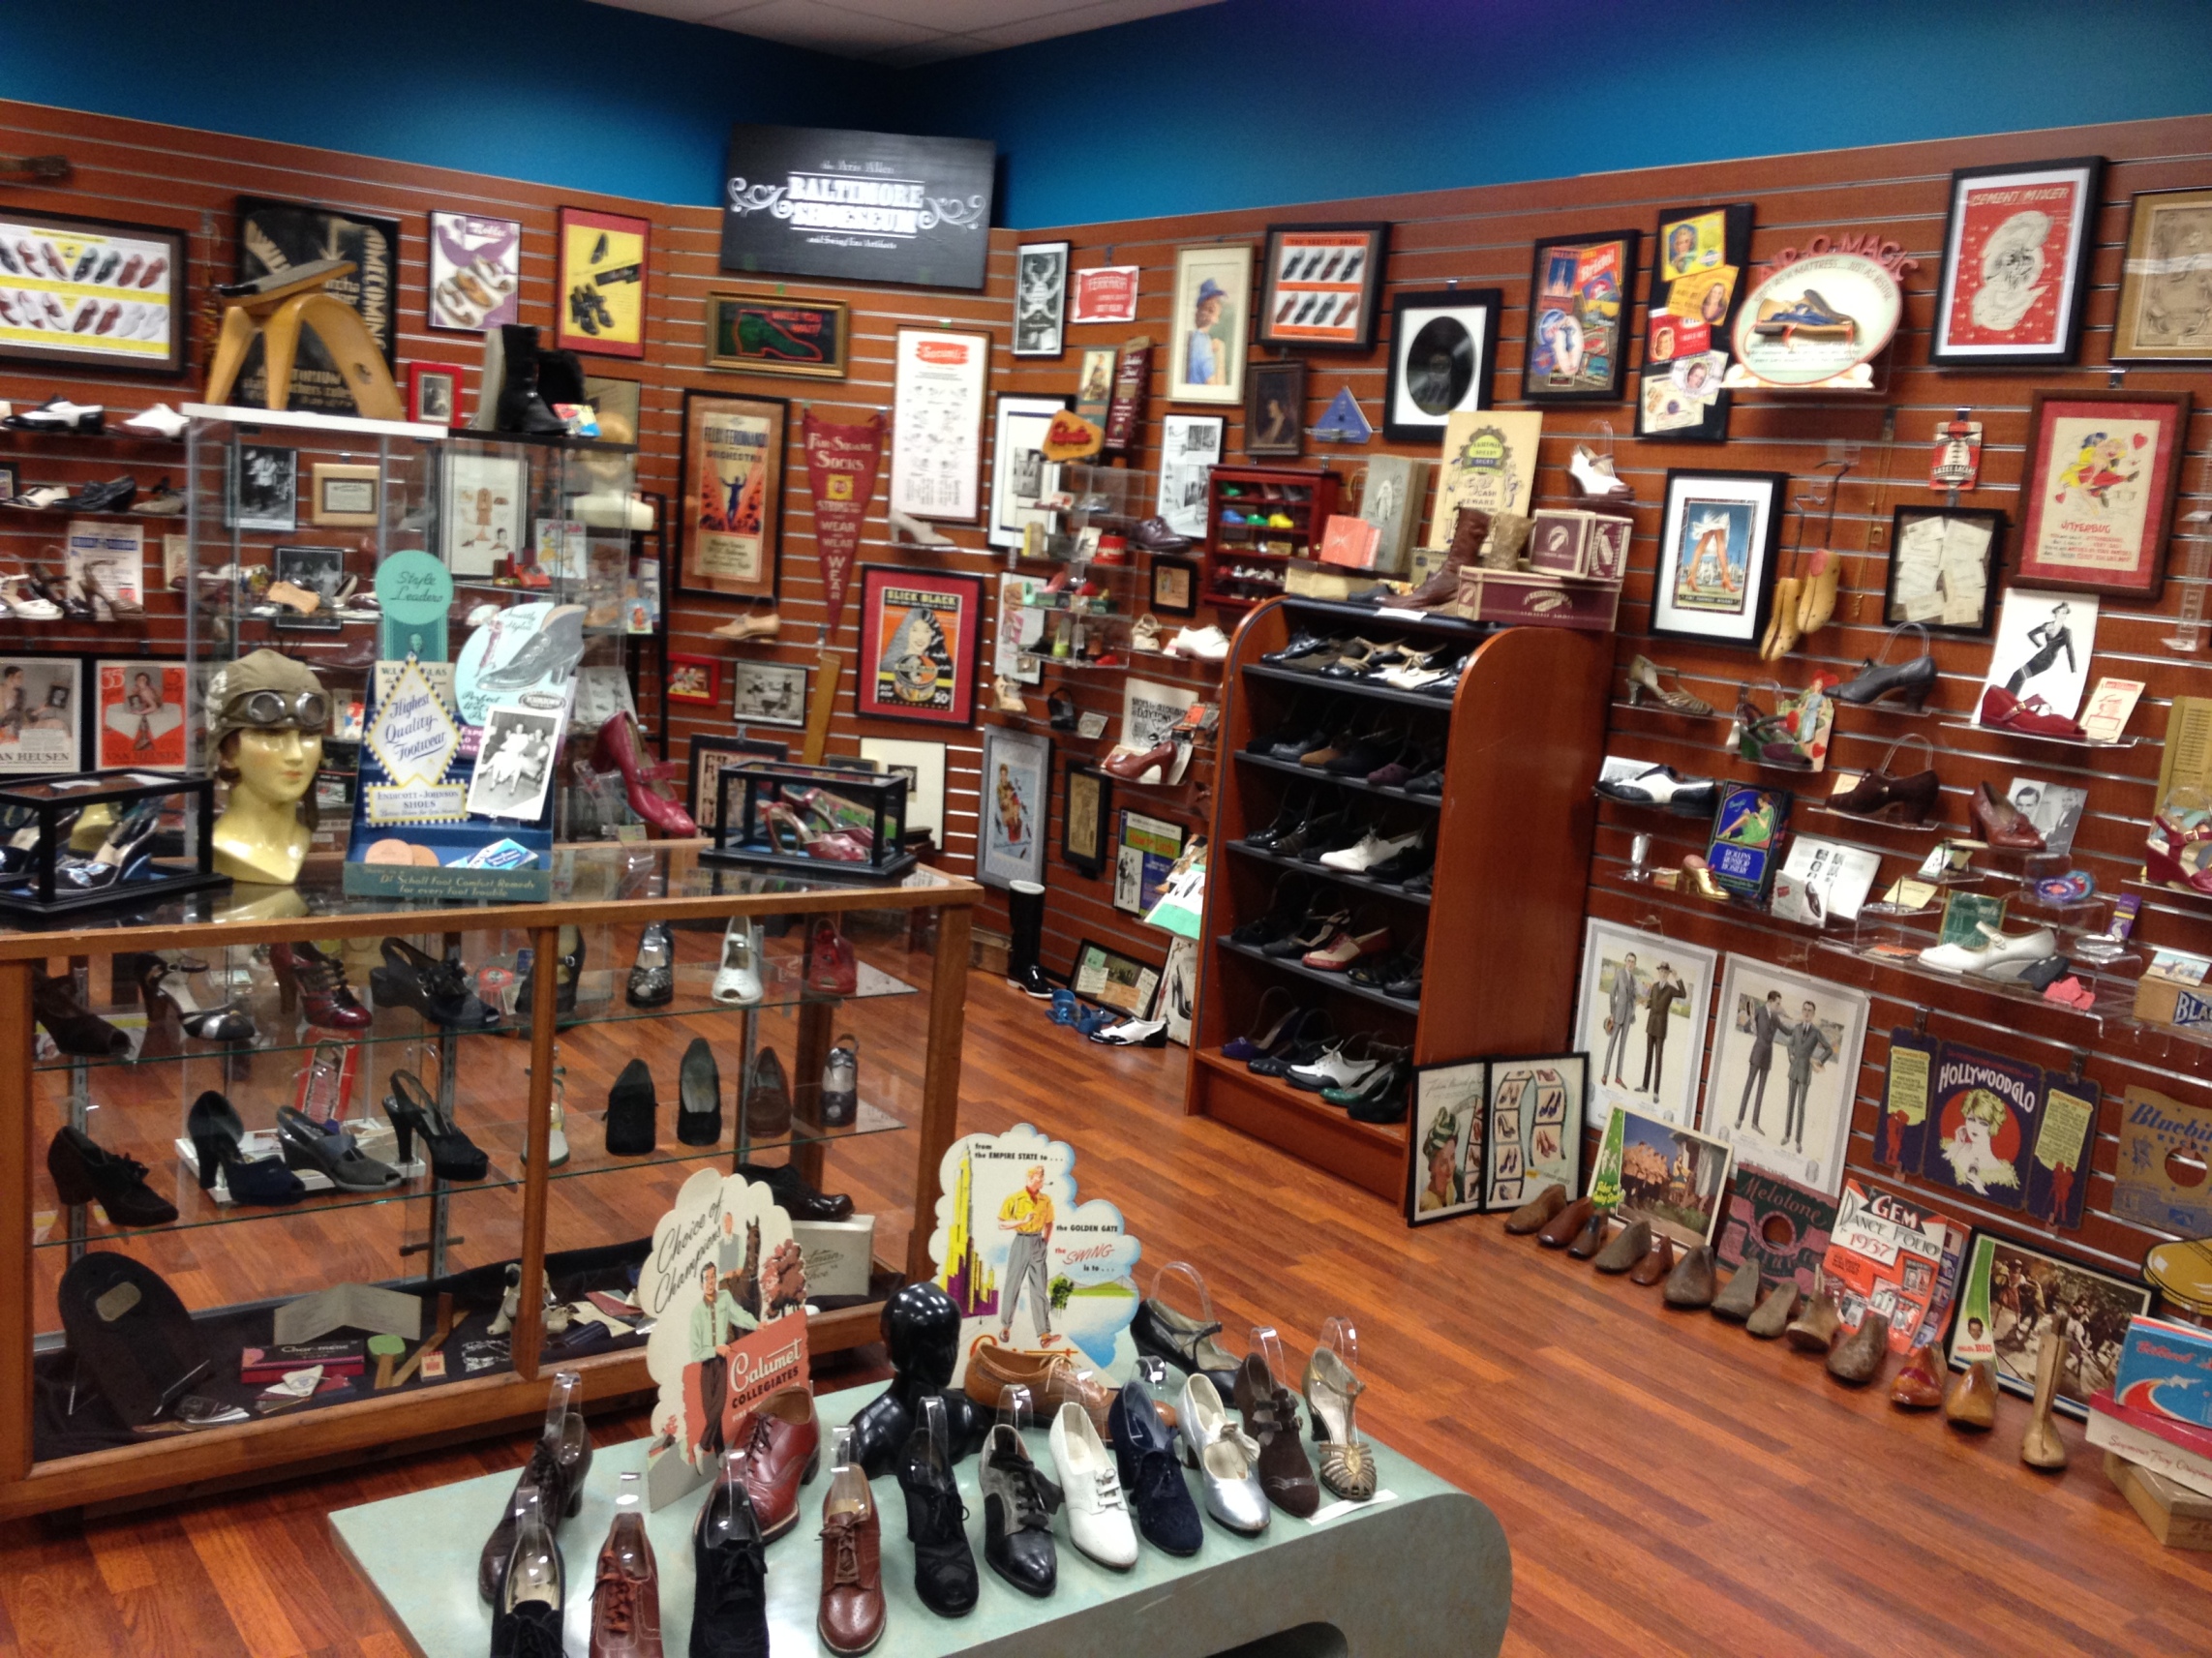 baltimore-shoeseum-our-collection-6-2012